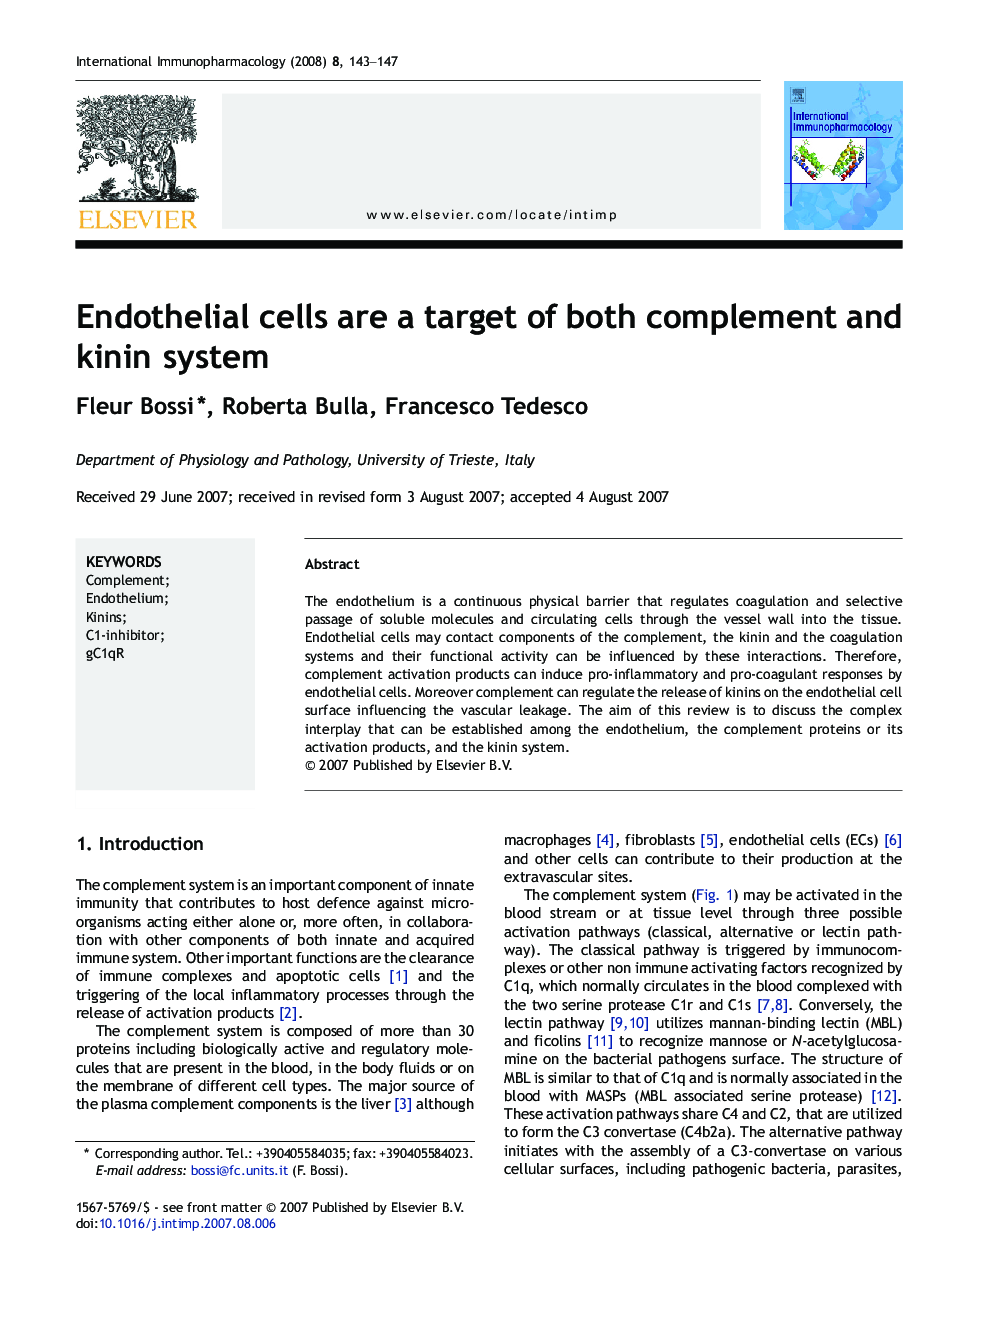 Endothelial cells are a target of both complement and kinin system